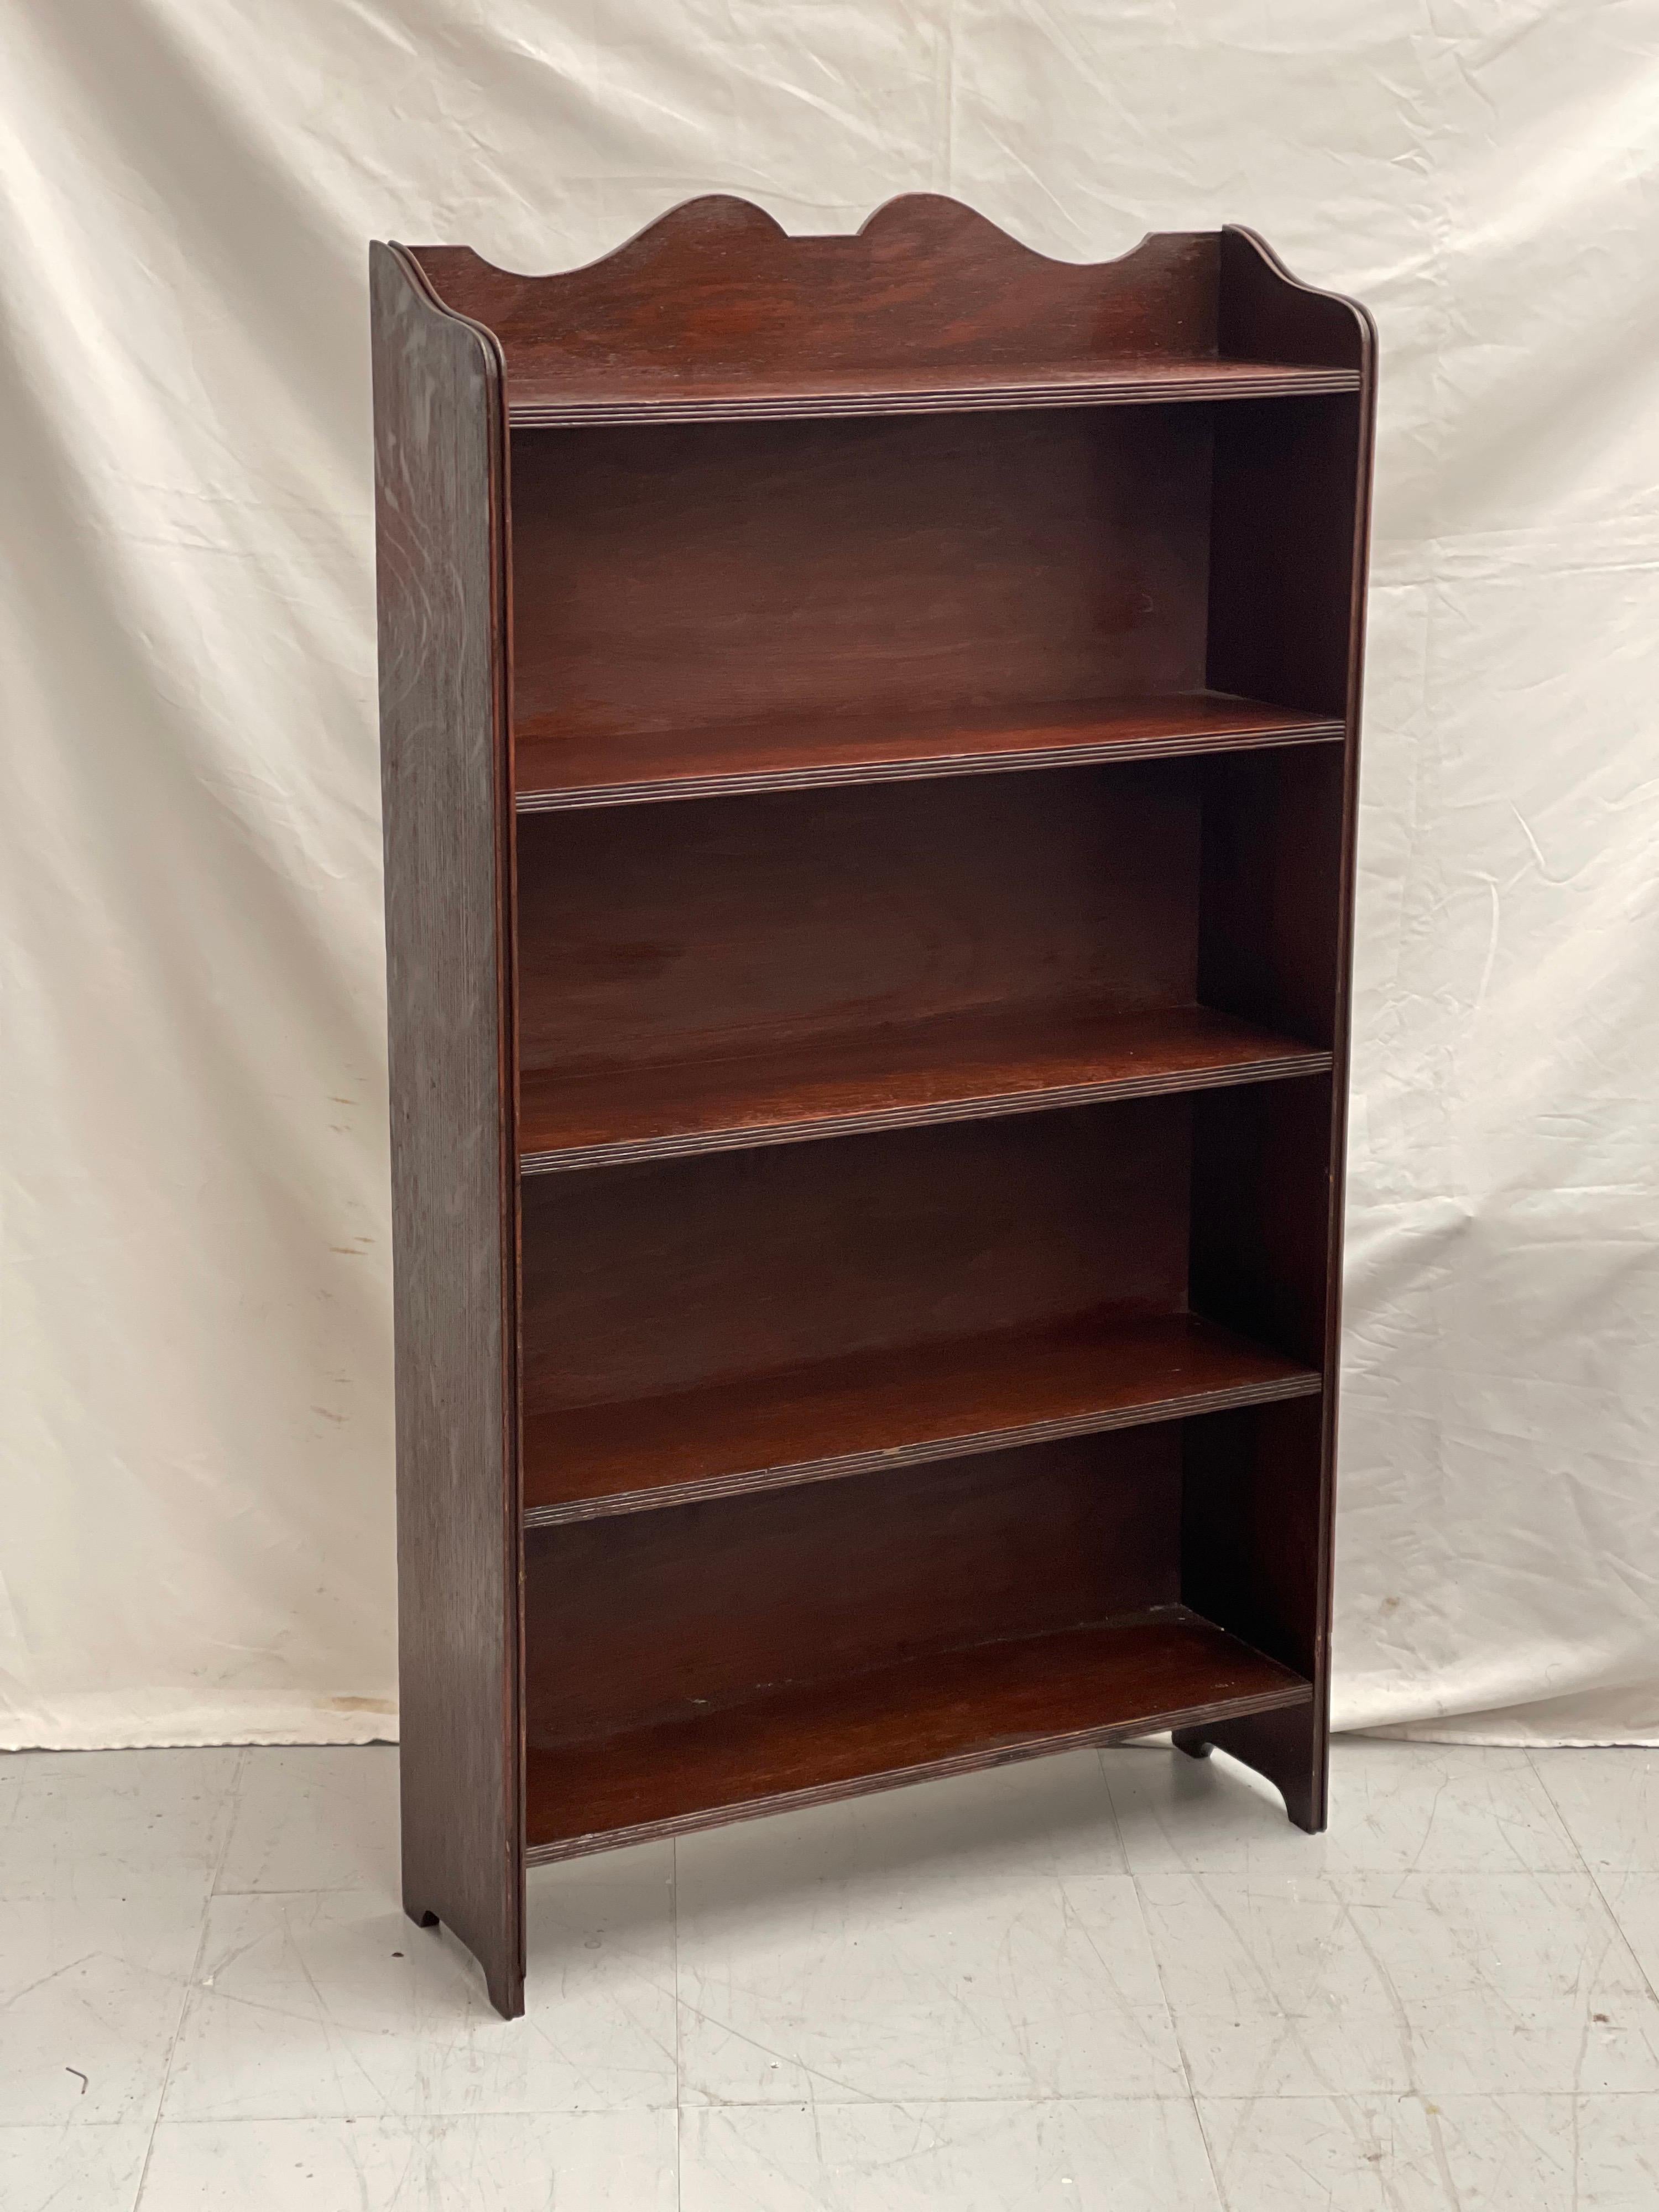 Vintage Solid Mahogany bookcase features Crown style cutouts on each side and curved crest. Perfect for a reading nook or a small space or as a Display Cabinet.

Shelf Height 8 inches
Shelf Depth 6.5 inches